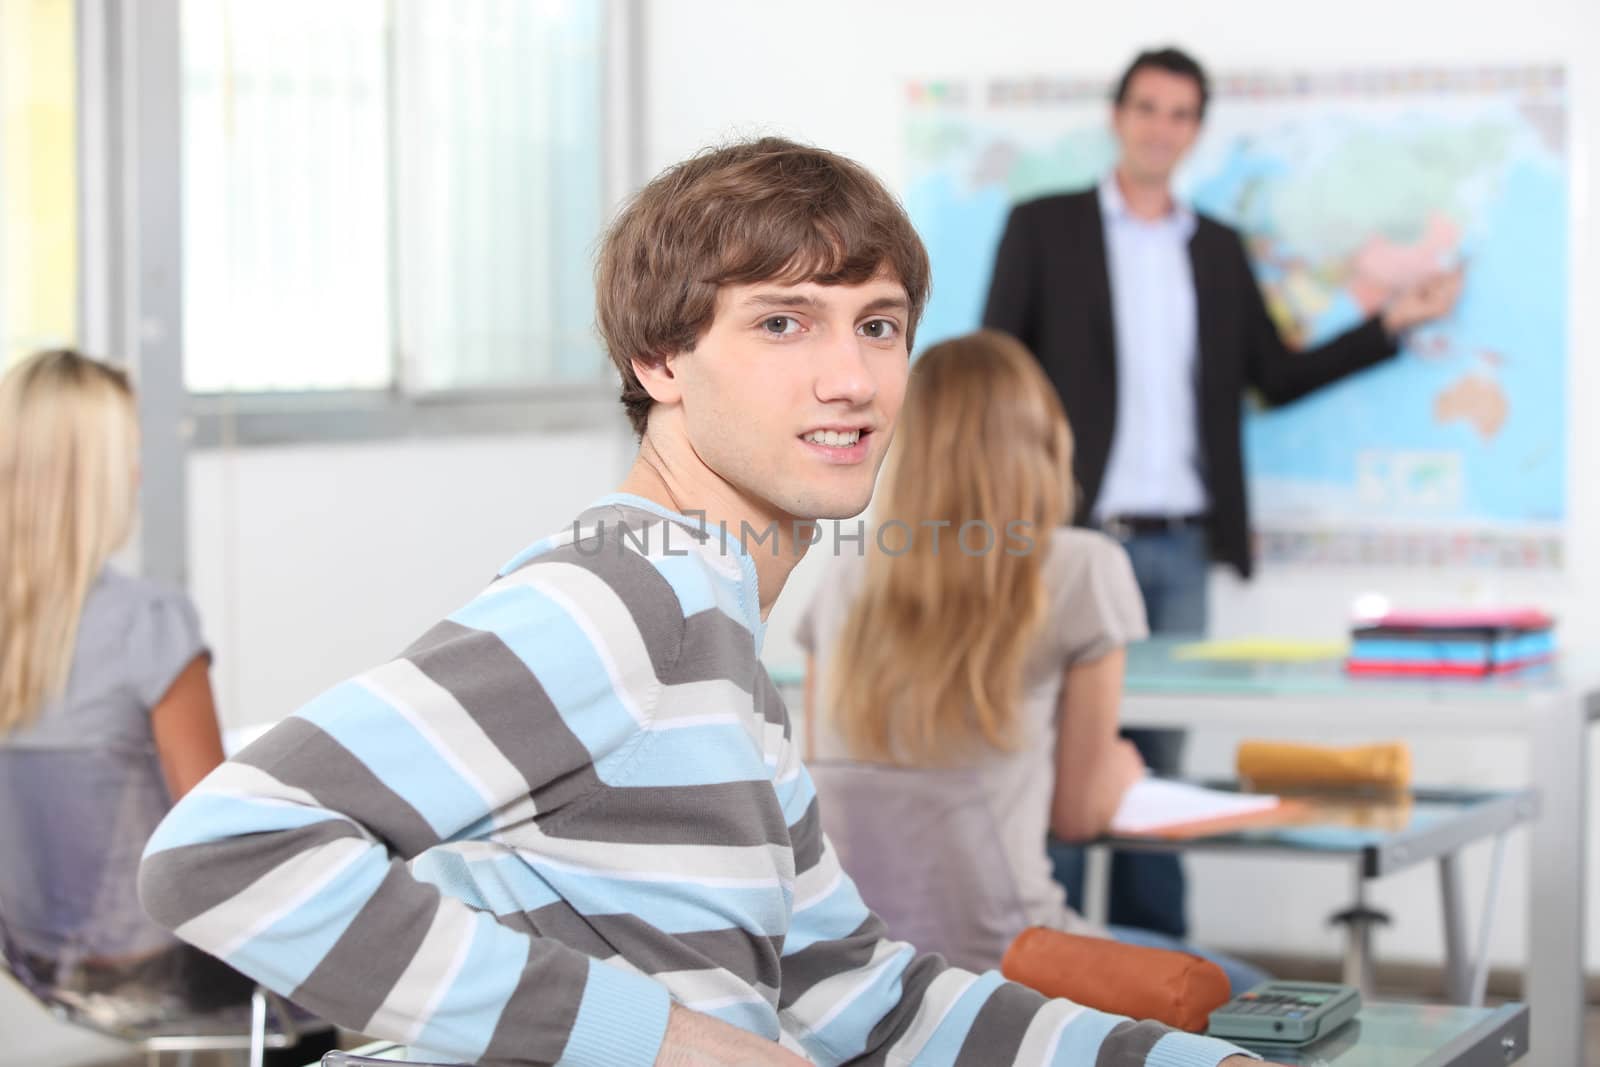 portrait of a young man in classroom by phovoir